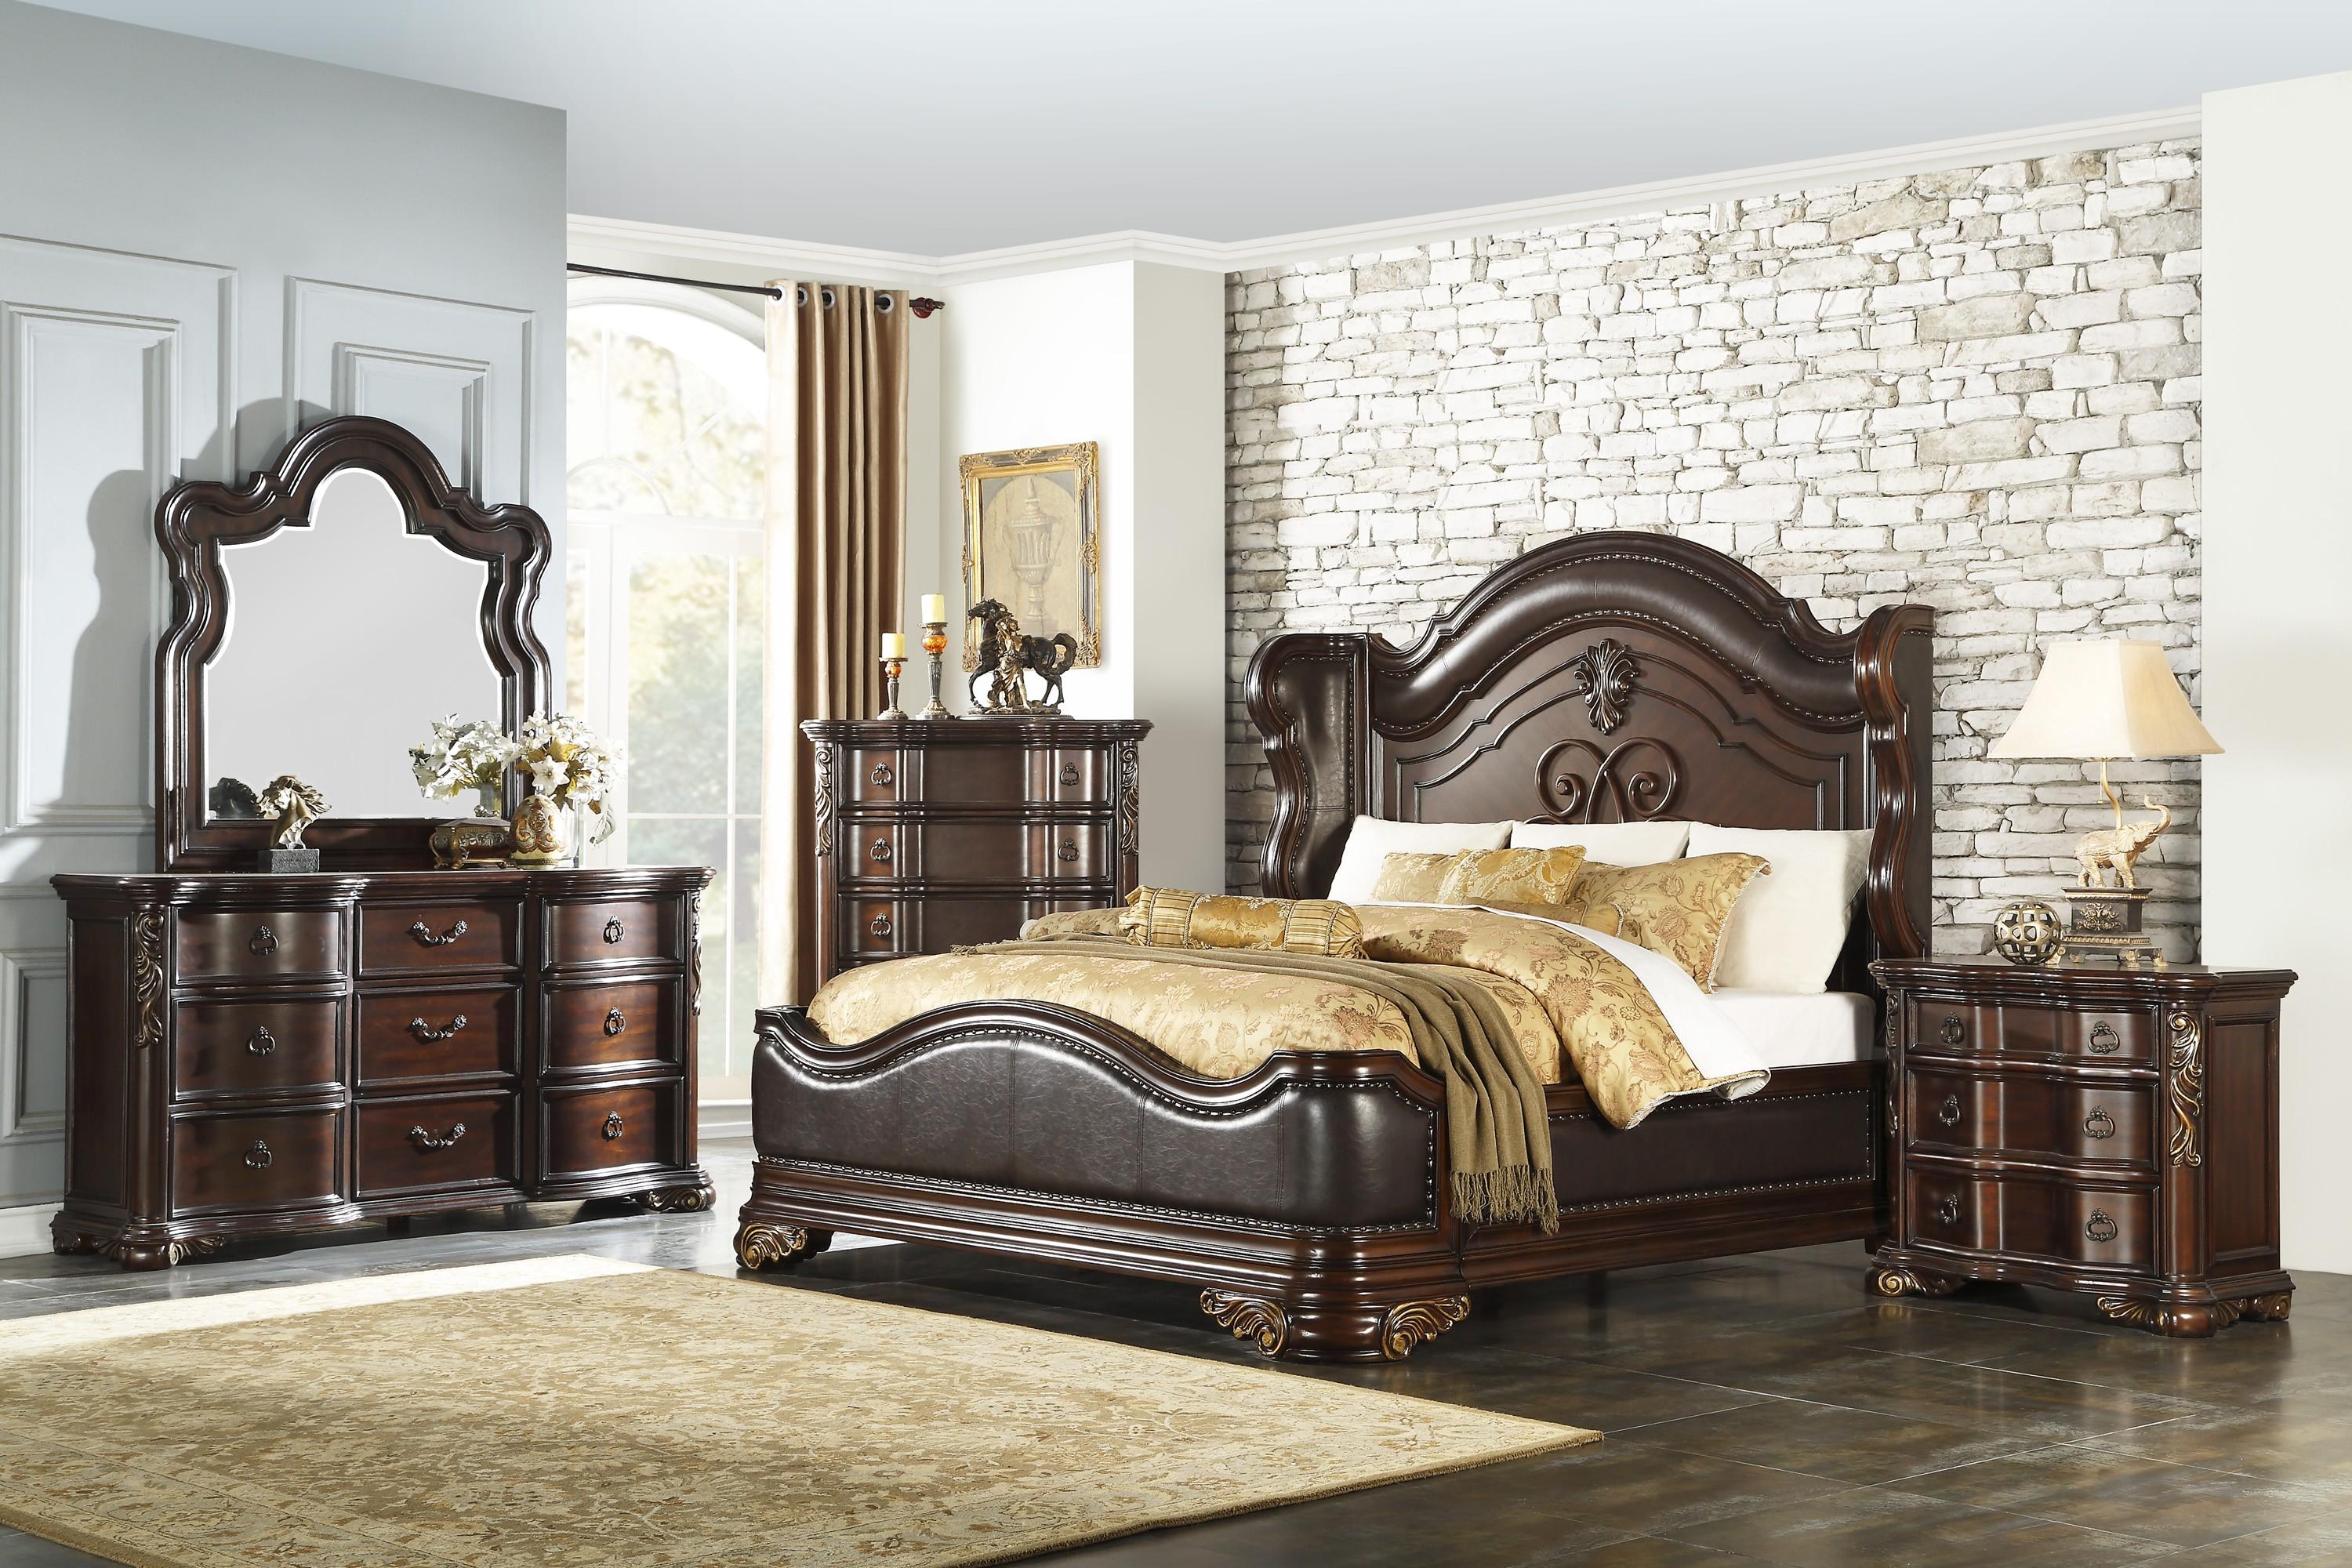 Traditional Bedroom Set 1603K-1CK-6PC Royal Highlands 1603K-1CK-6PC in Cherry Faux Leather